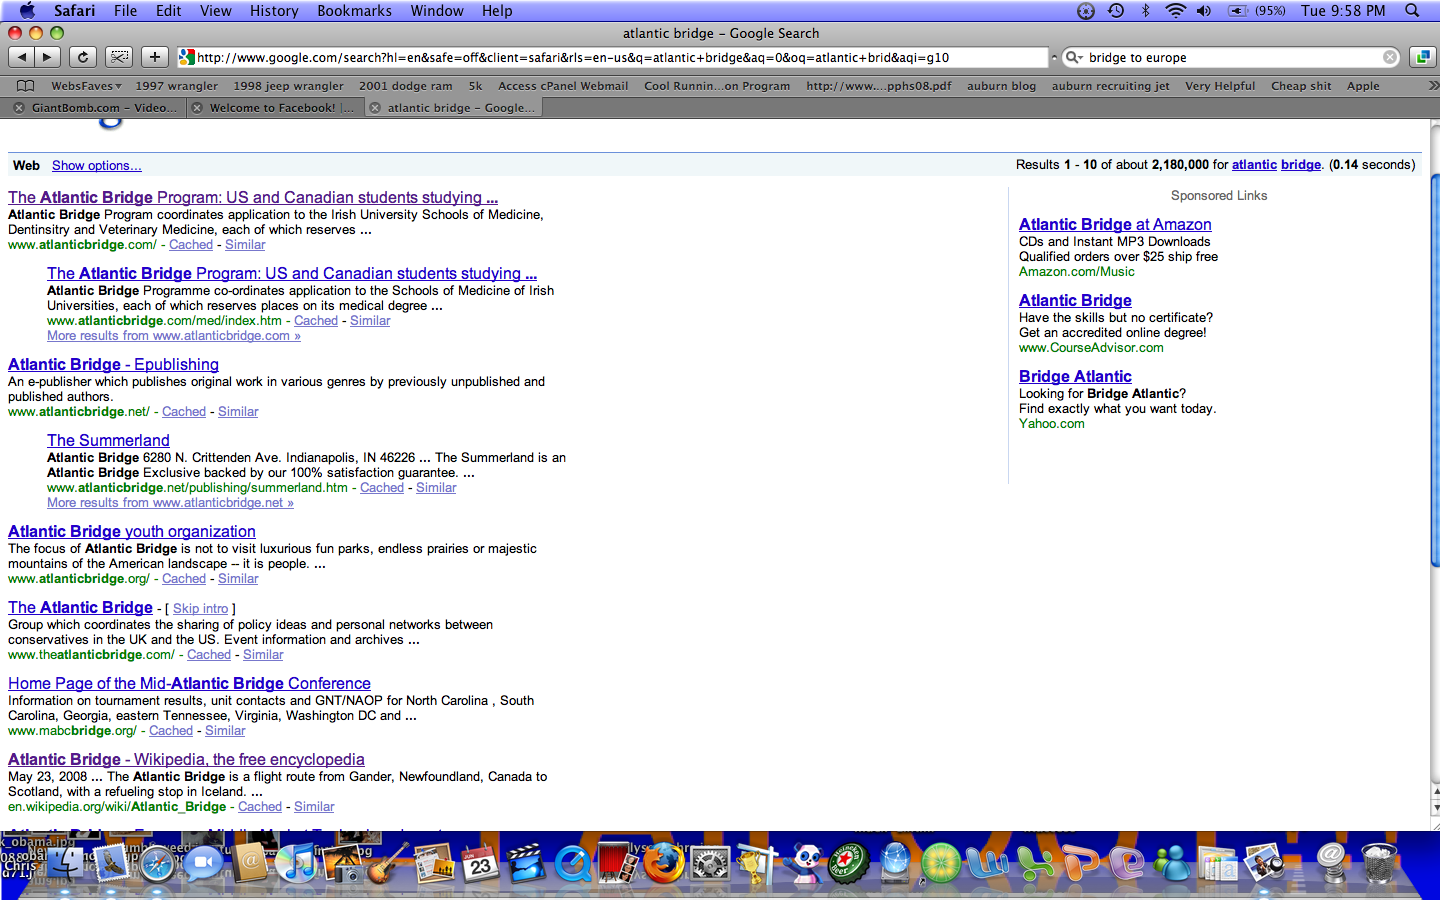 Yahoo advertising on Google AdWords? What!? - Off-Topic - Giant Bomb